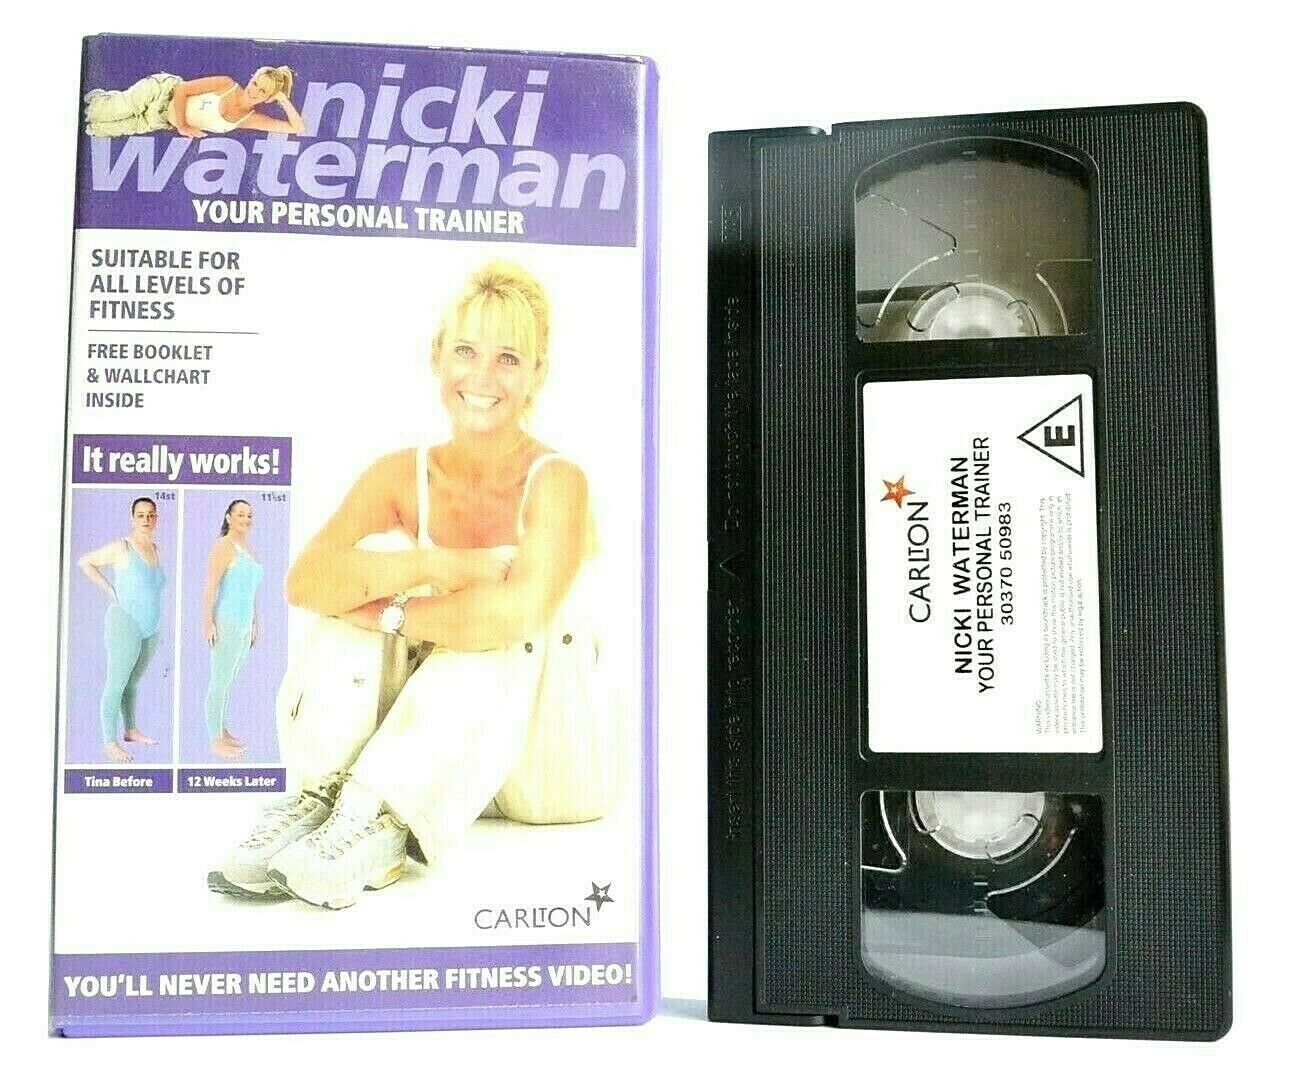 Your Personal Trainer: By Nicki Waterman - Fitness Video - Body Shape - Pal VHS-